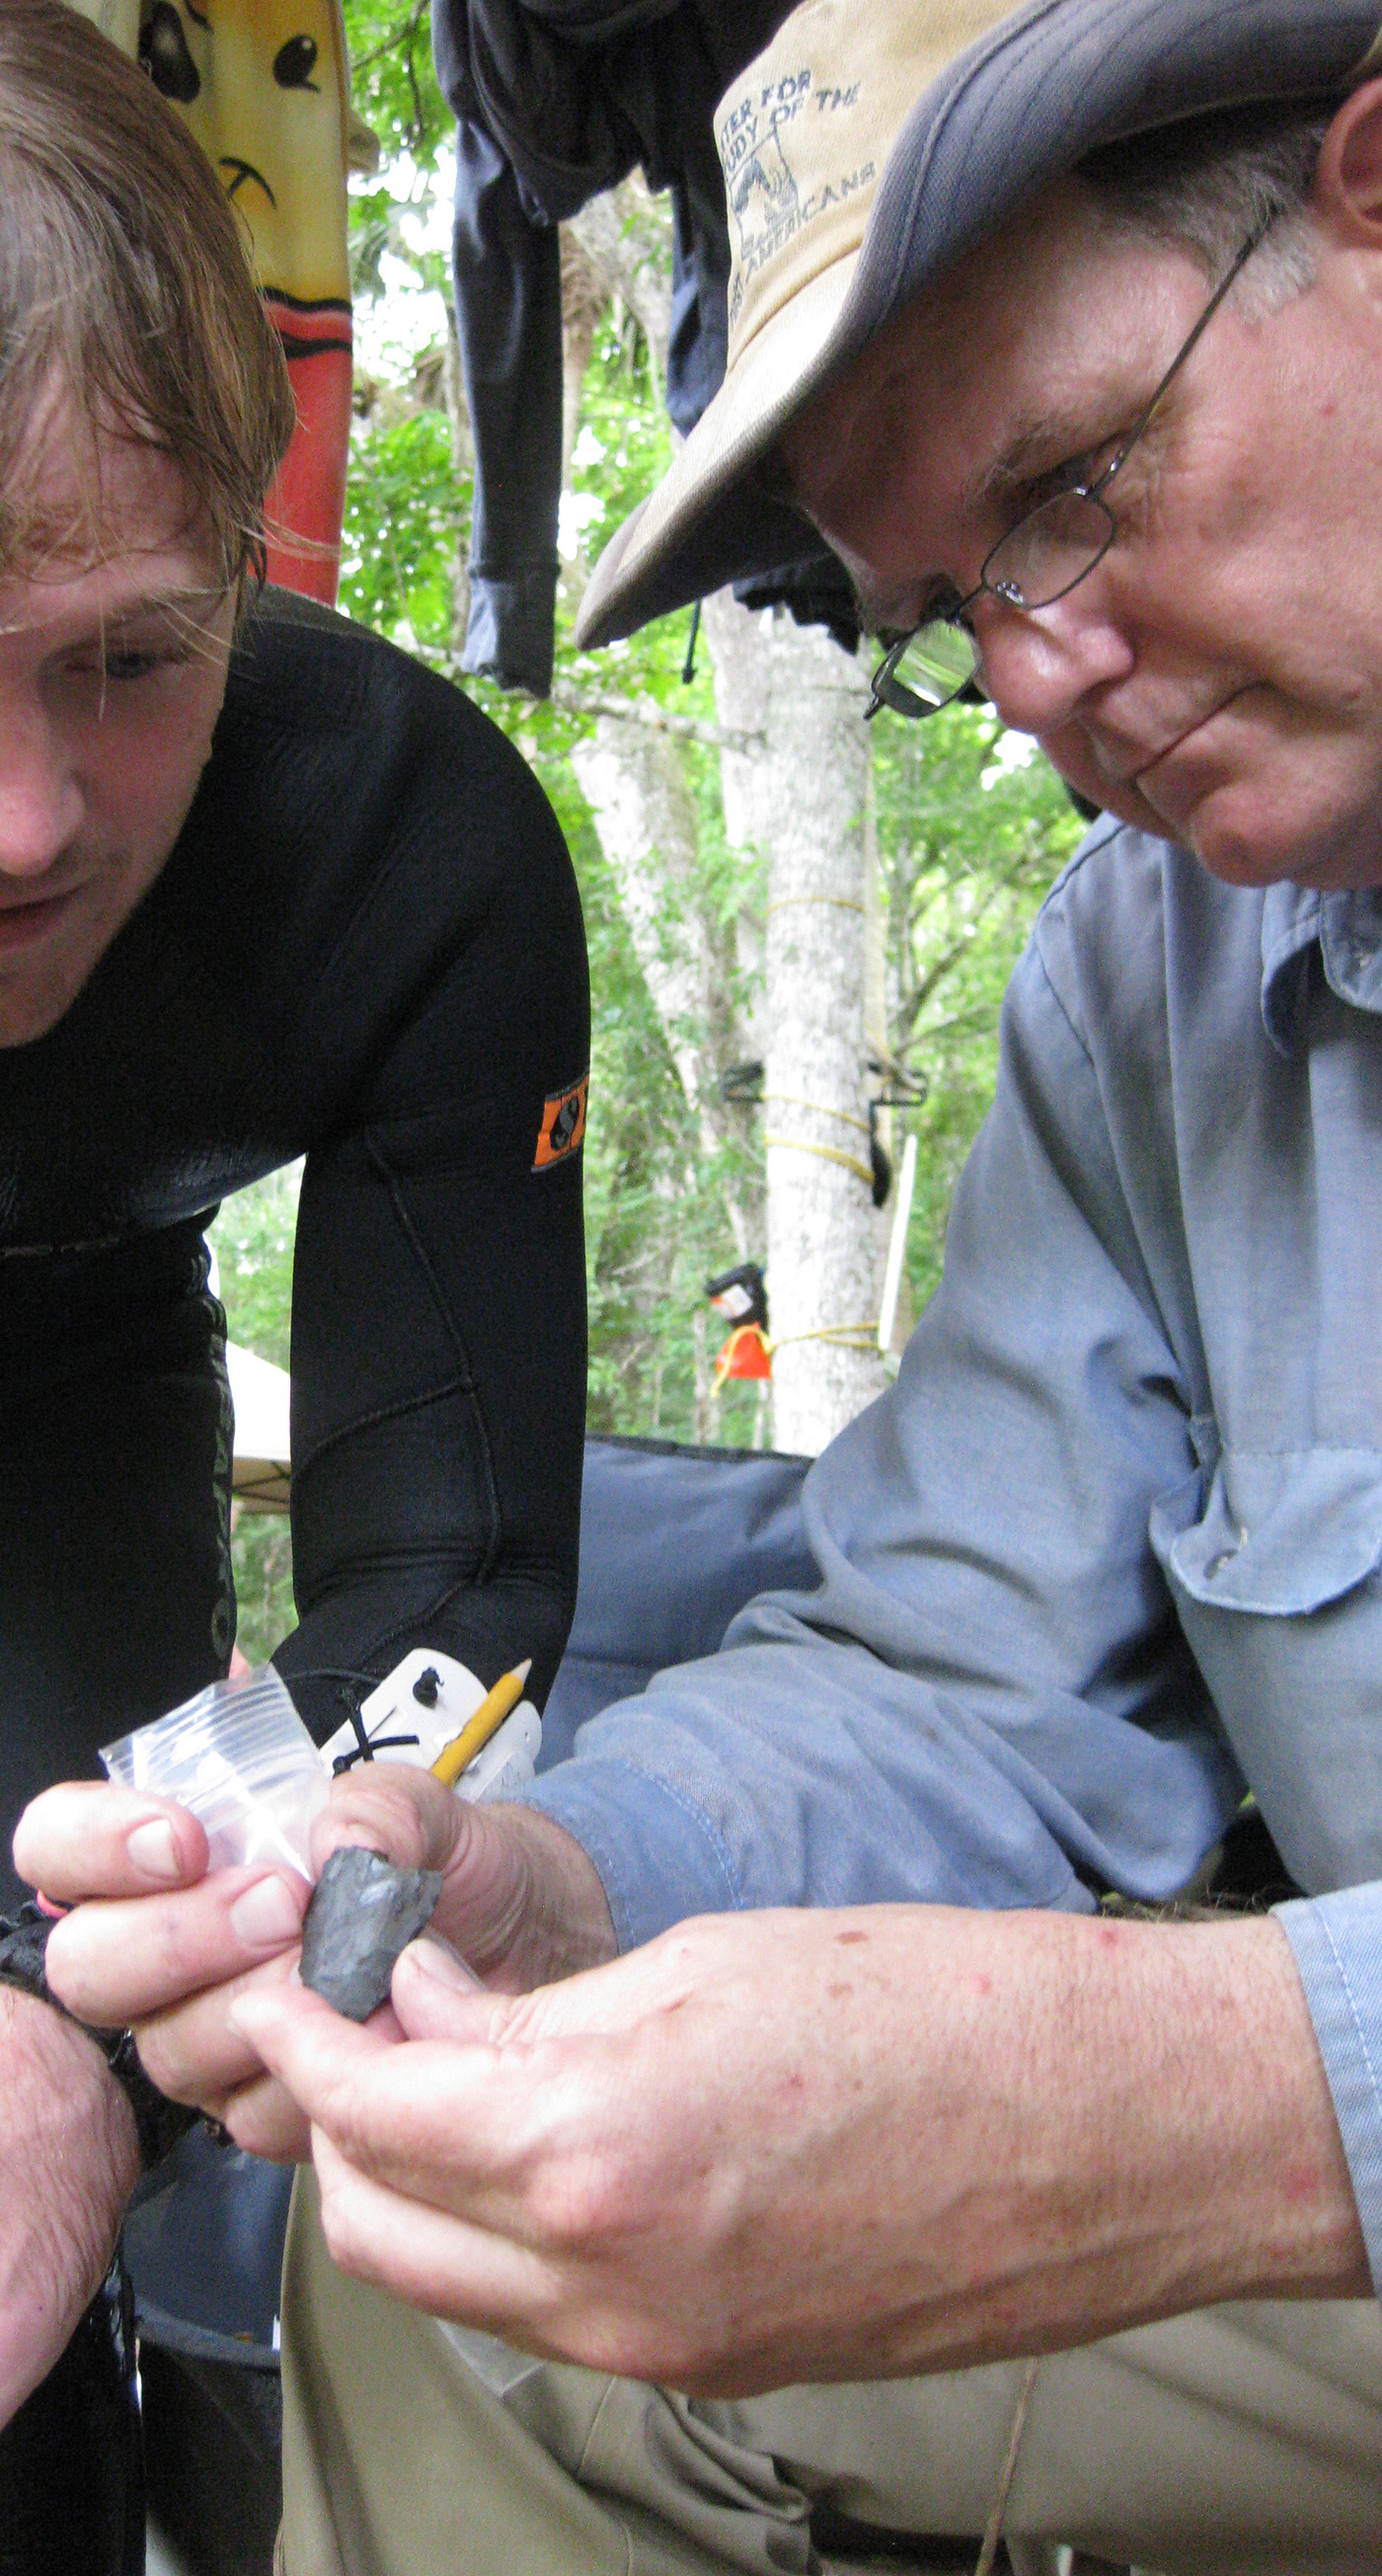 Texas A&amp;M archaeologist Michael Waters and graduate student Morgan Smith examine a 14,600-year-old knife found at the Page-Ladson site in Florida